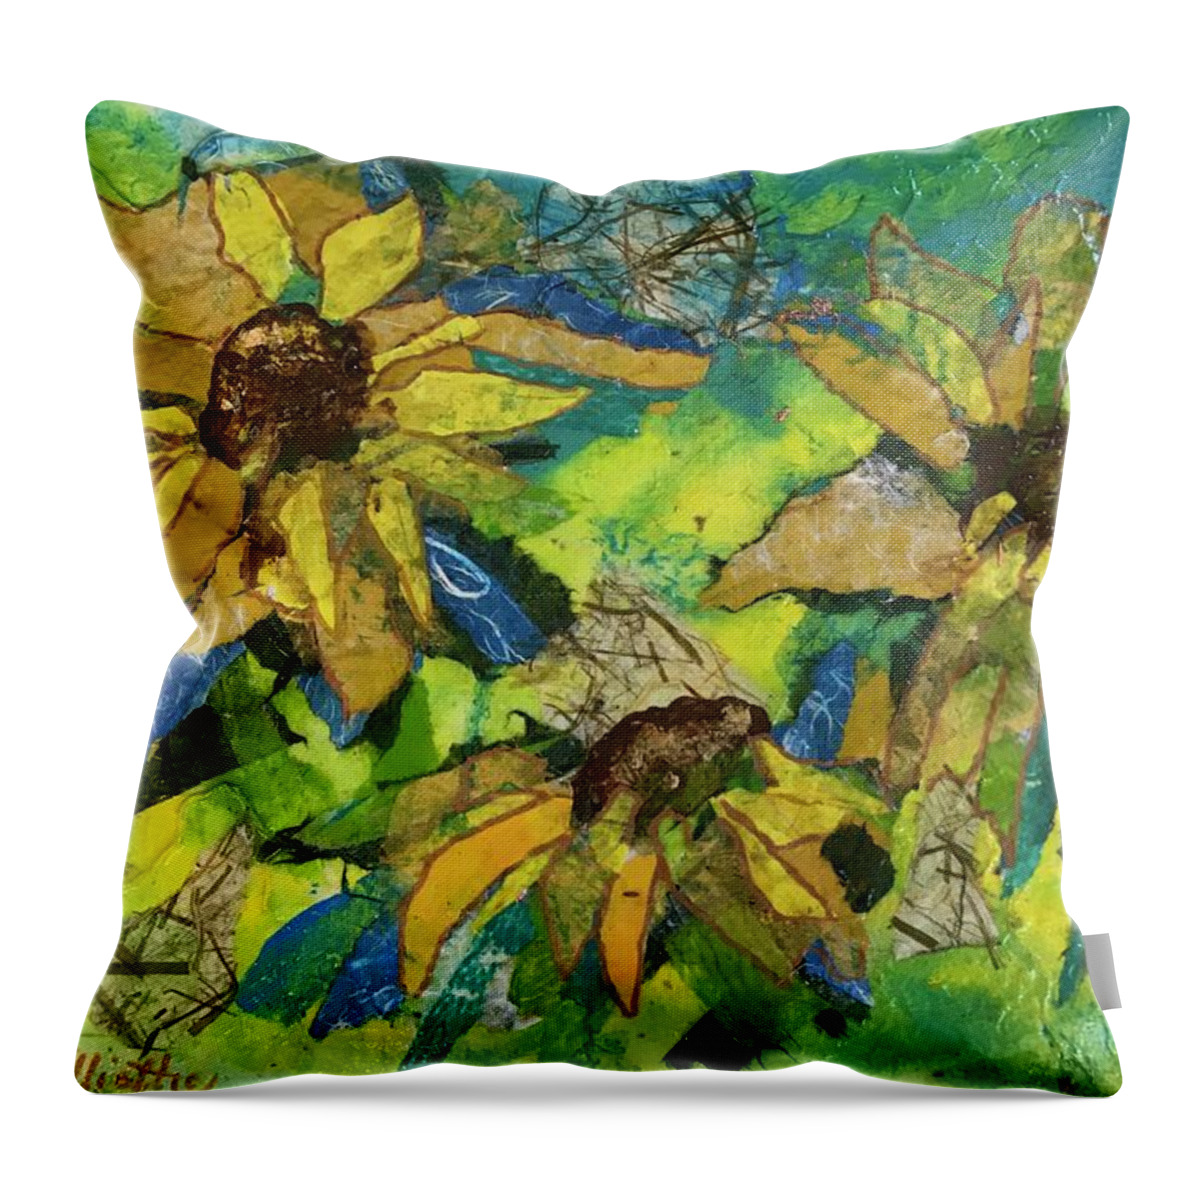 Sunflowers Throw Pillow featuring the painting Sunflowers by the Sea by Elaine Elliott